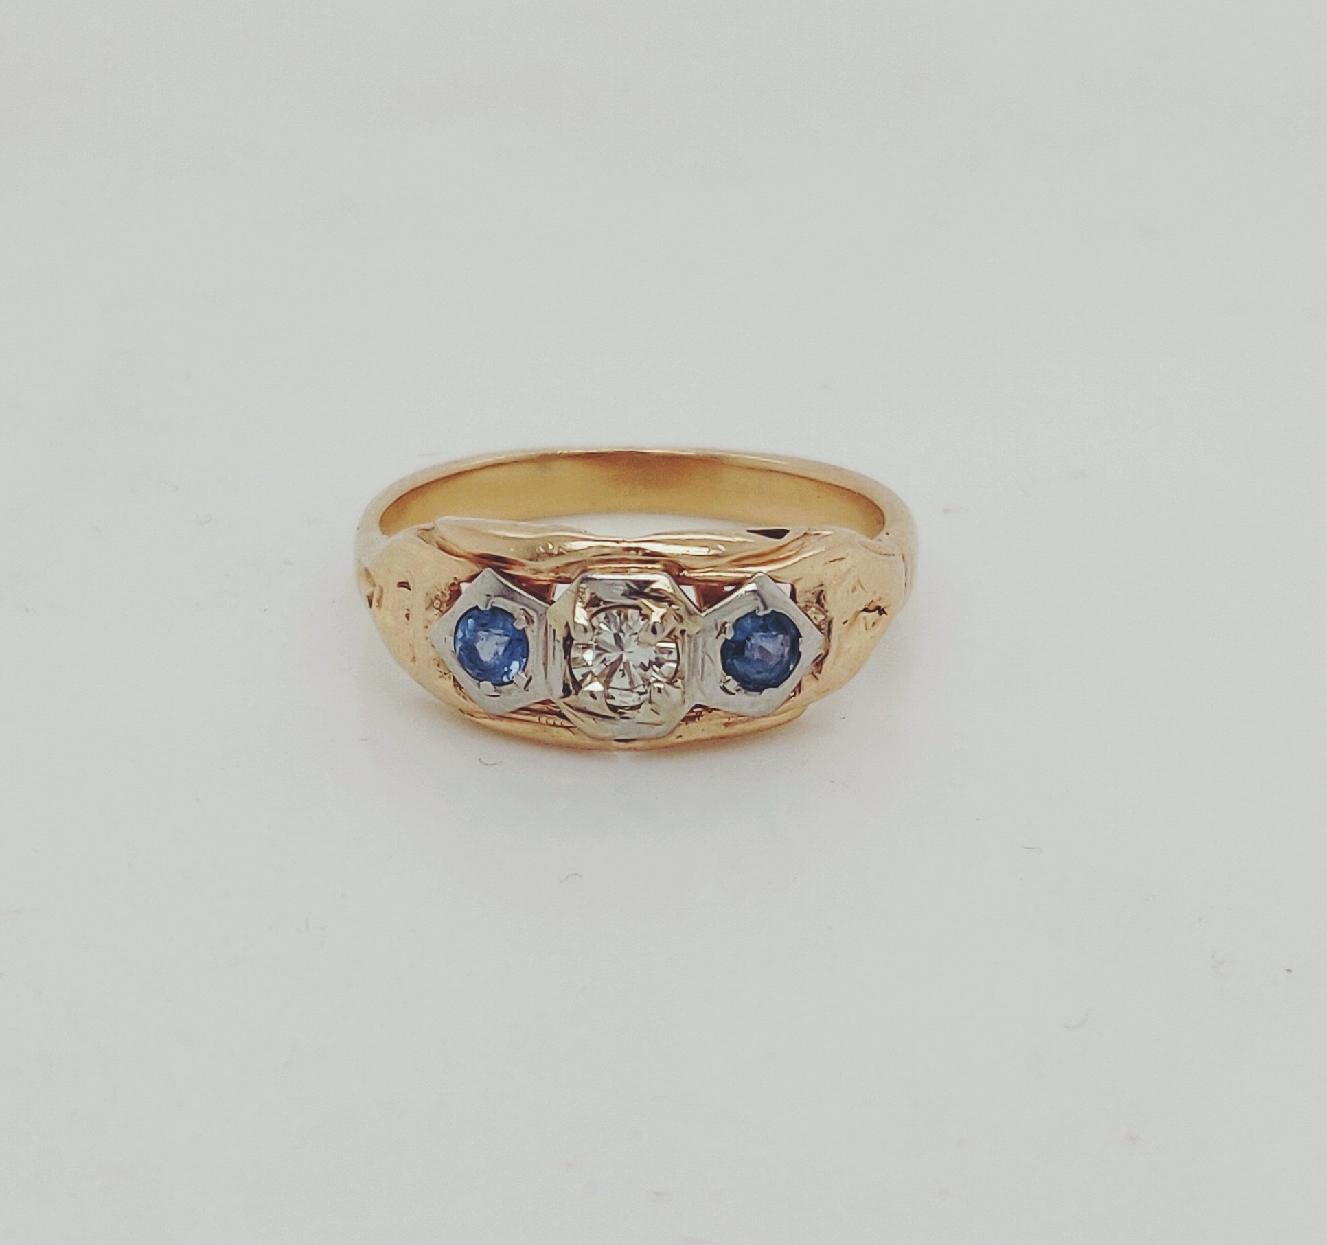 14K Yellow Gold Antique Diamond Ring with 2 Sapphire Accents Size 5.25